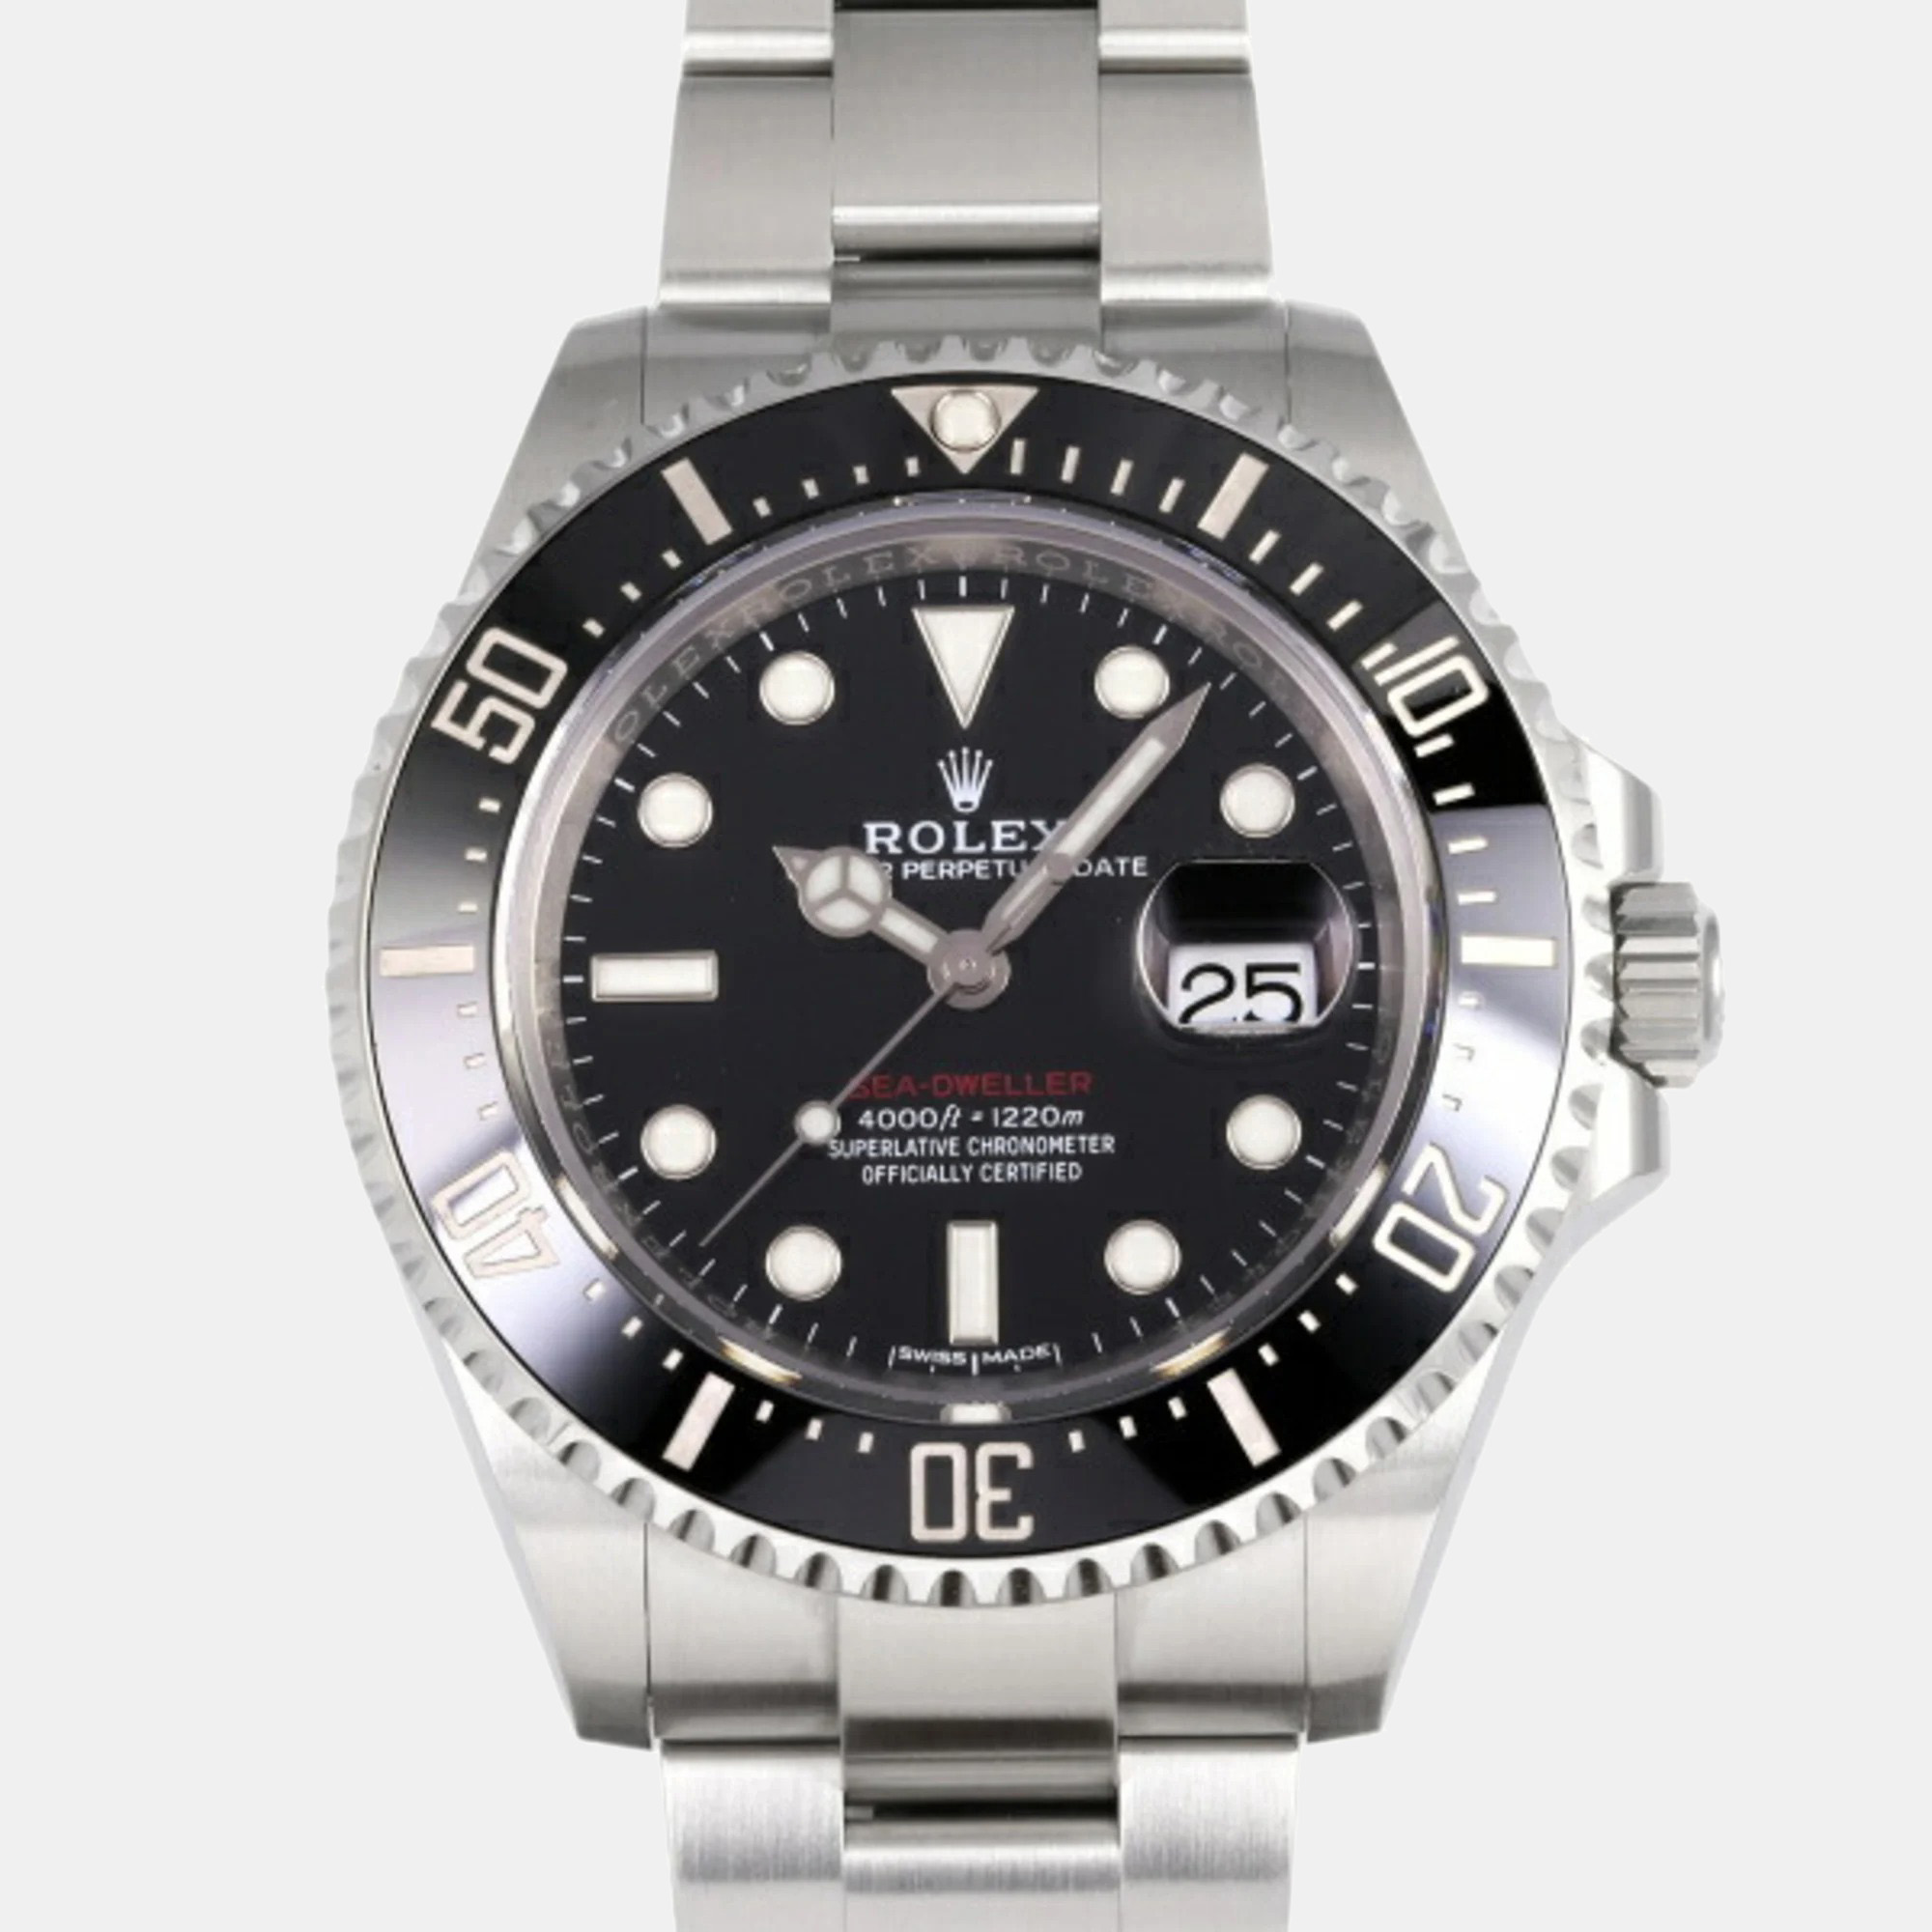 

Rolex Black Stainless Steel And Ceramic Sea-Dweller 126600 Automatic Men's Wristwatch 43 mm